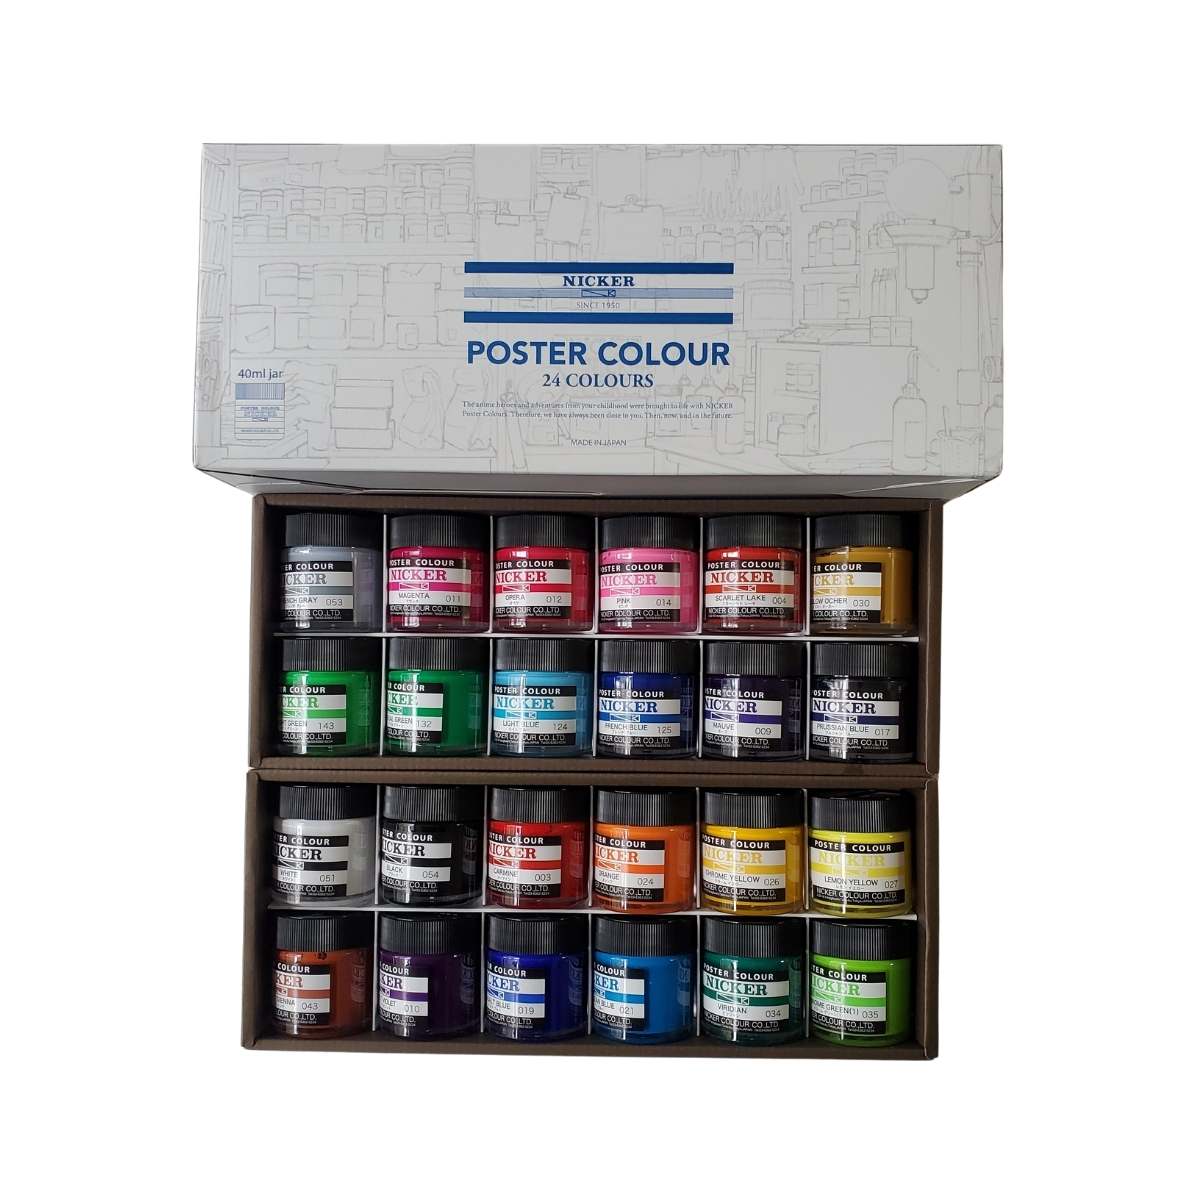 Load image into Gallery viewer, Nicker Colour Poster Paint Nicker - Poster Colours - Set of 24 Colours - 40mL Jars - Item #PC40ML24N
